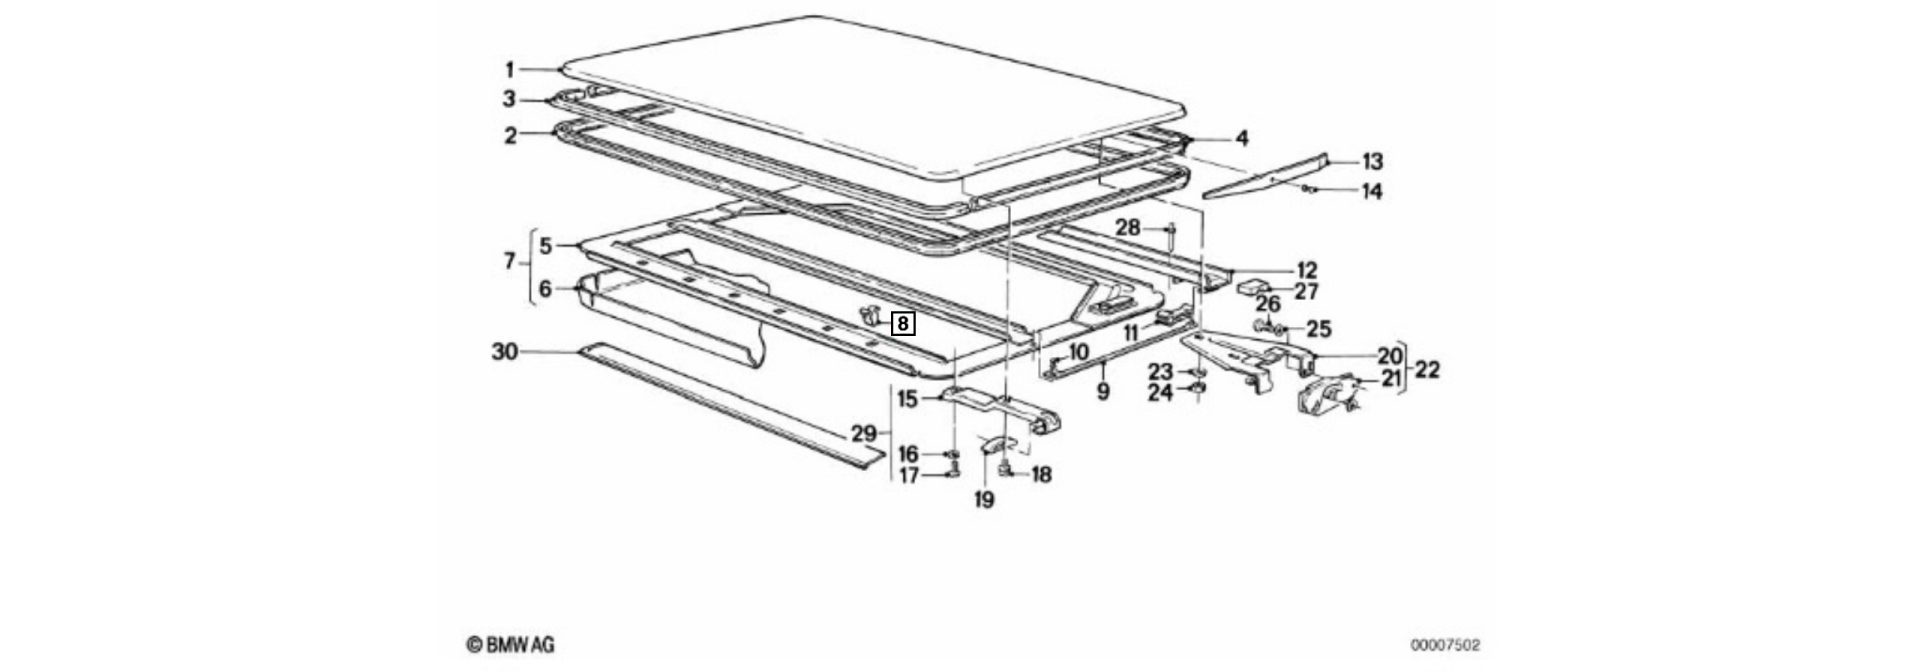 Clamp for sunroof roof liner exploded-view drawing